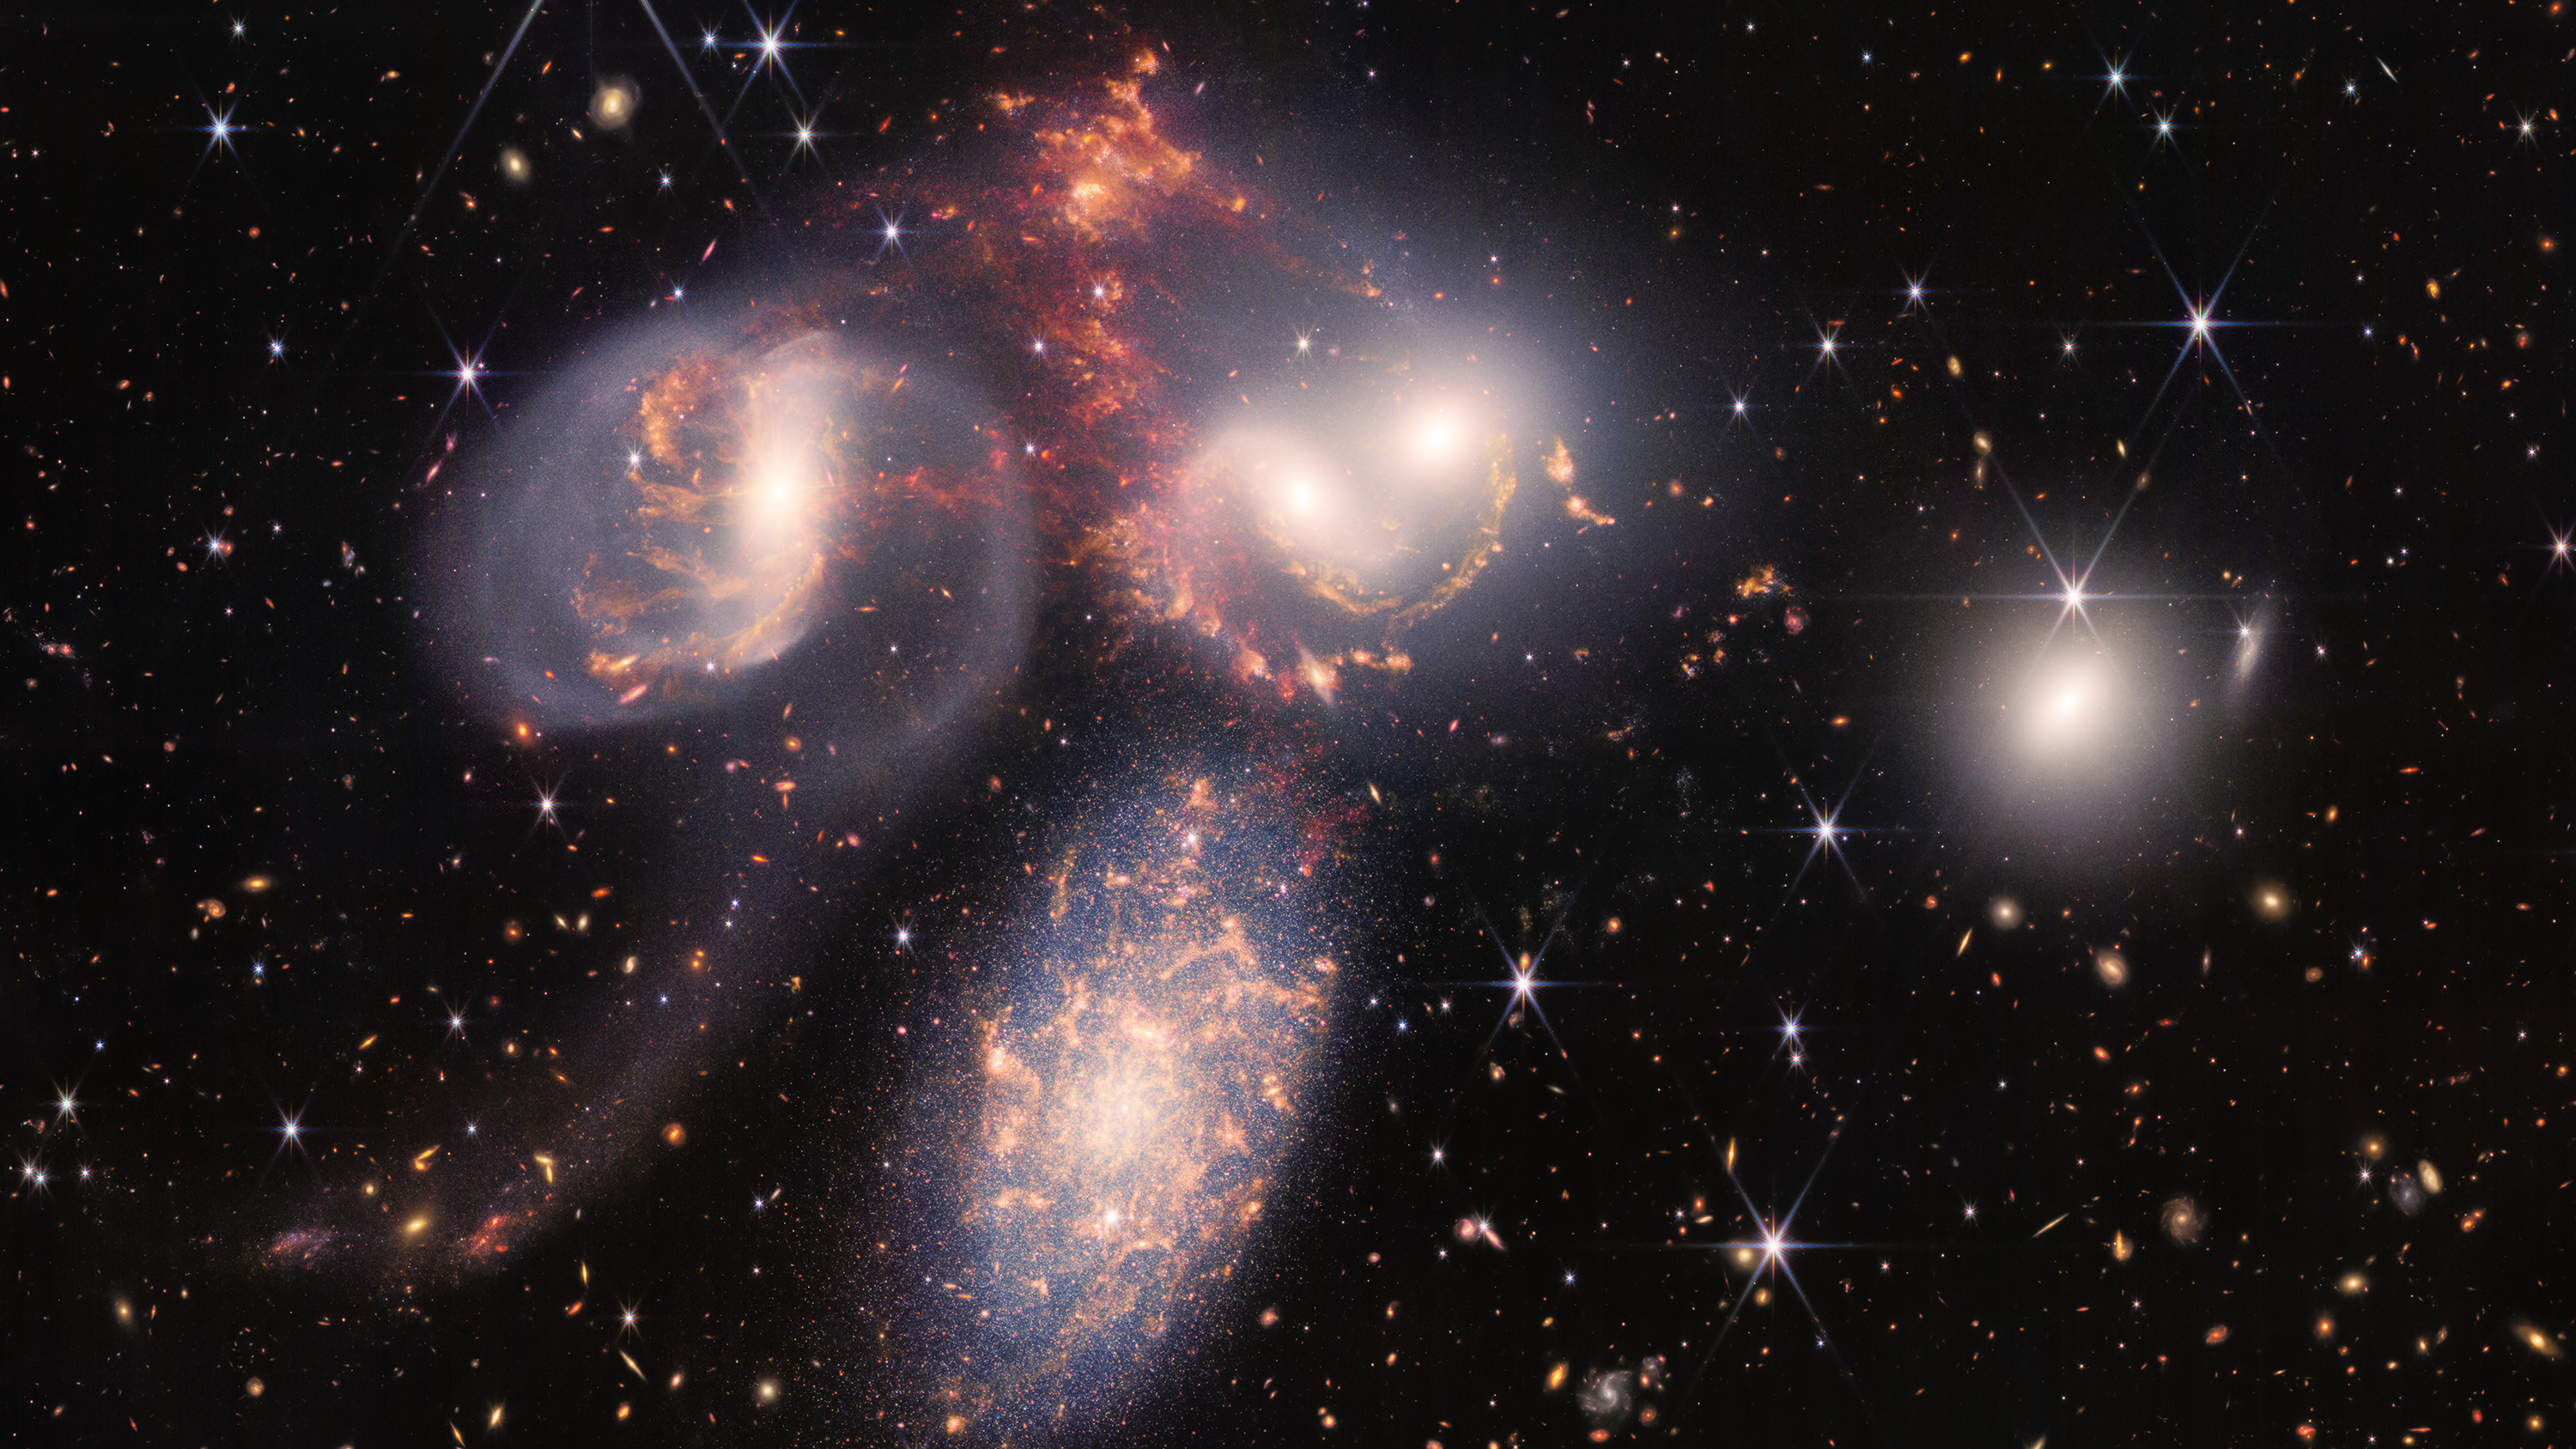 Stephan's Quintet, Stunning space telescope imagery, Universe's wonders, New discoveries, 3000x1690 HD Desktop